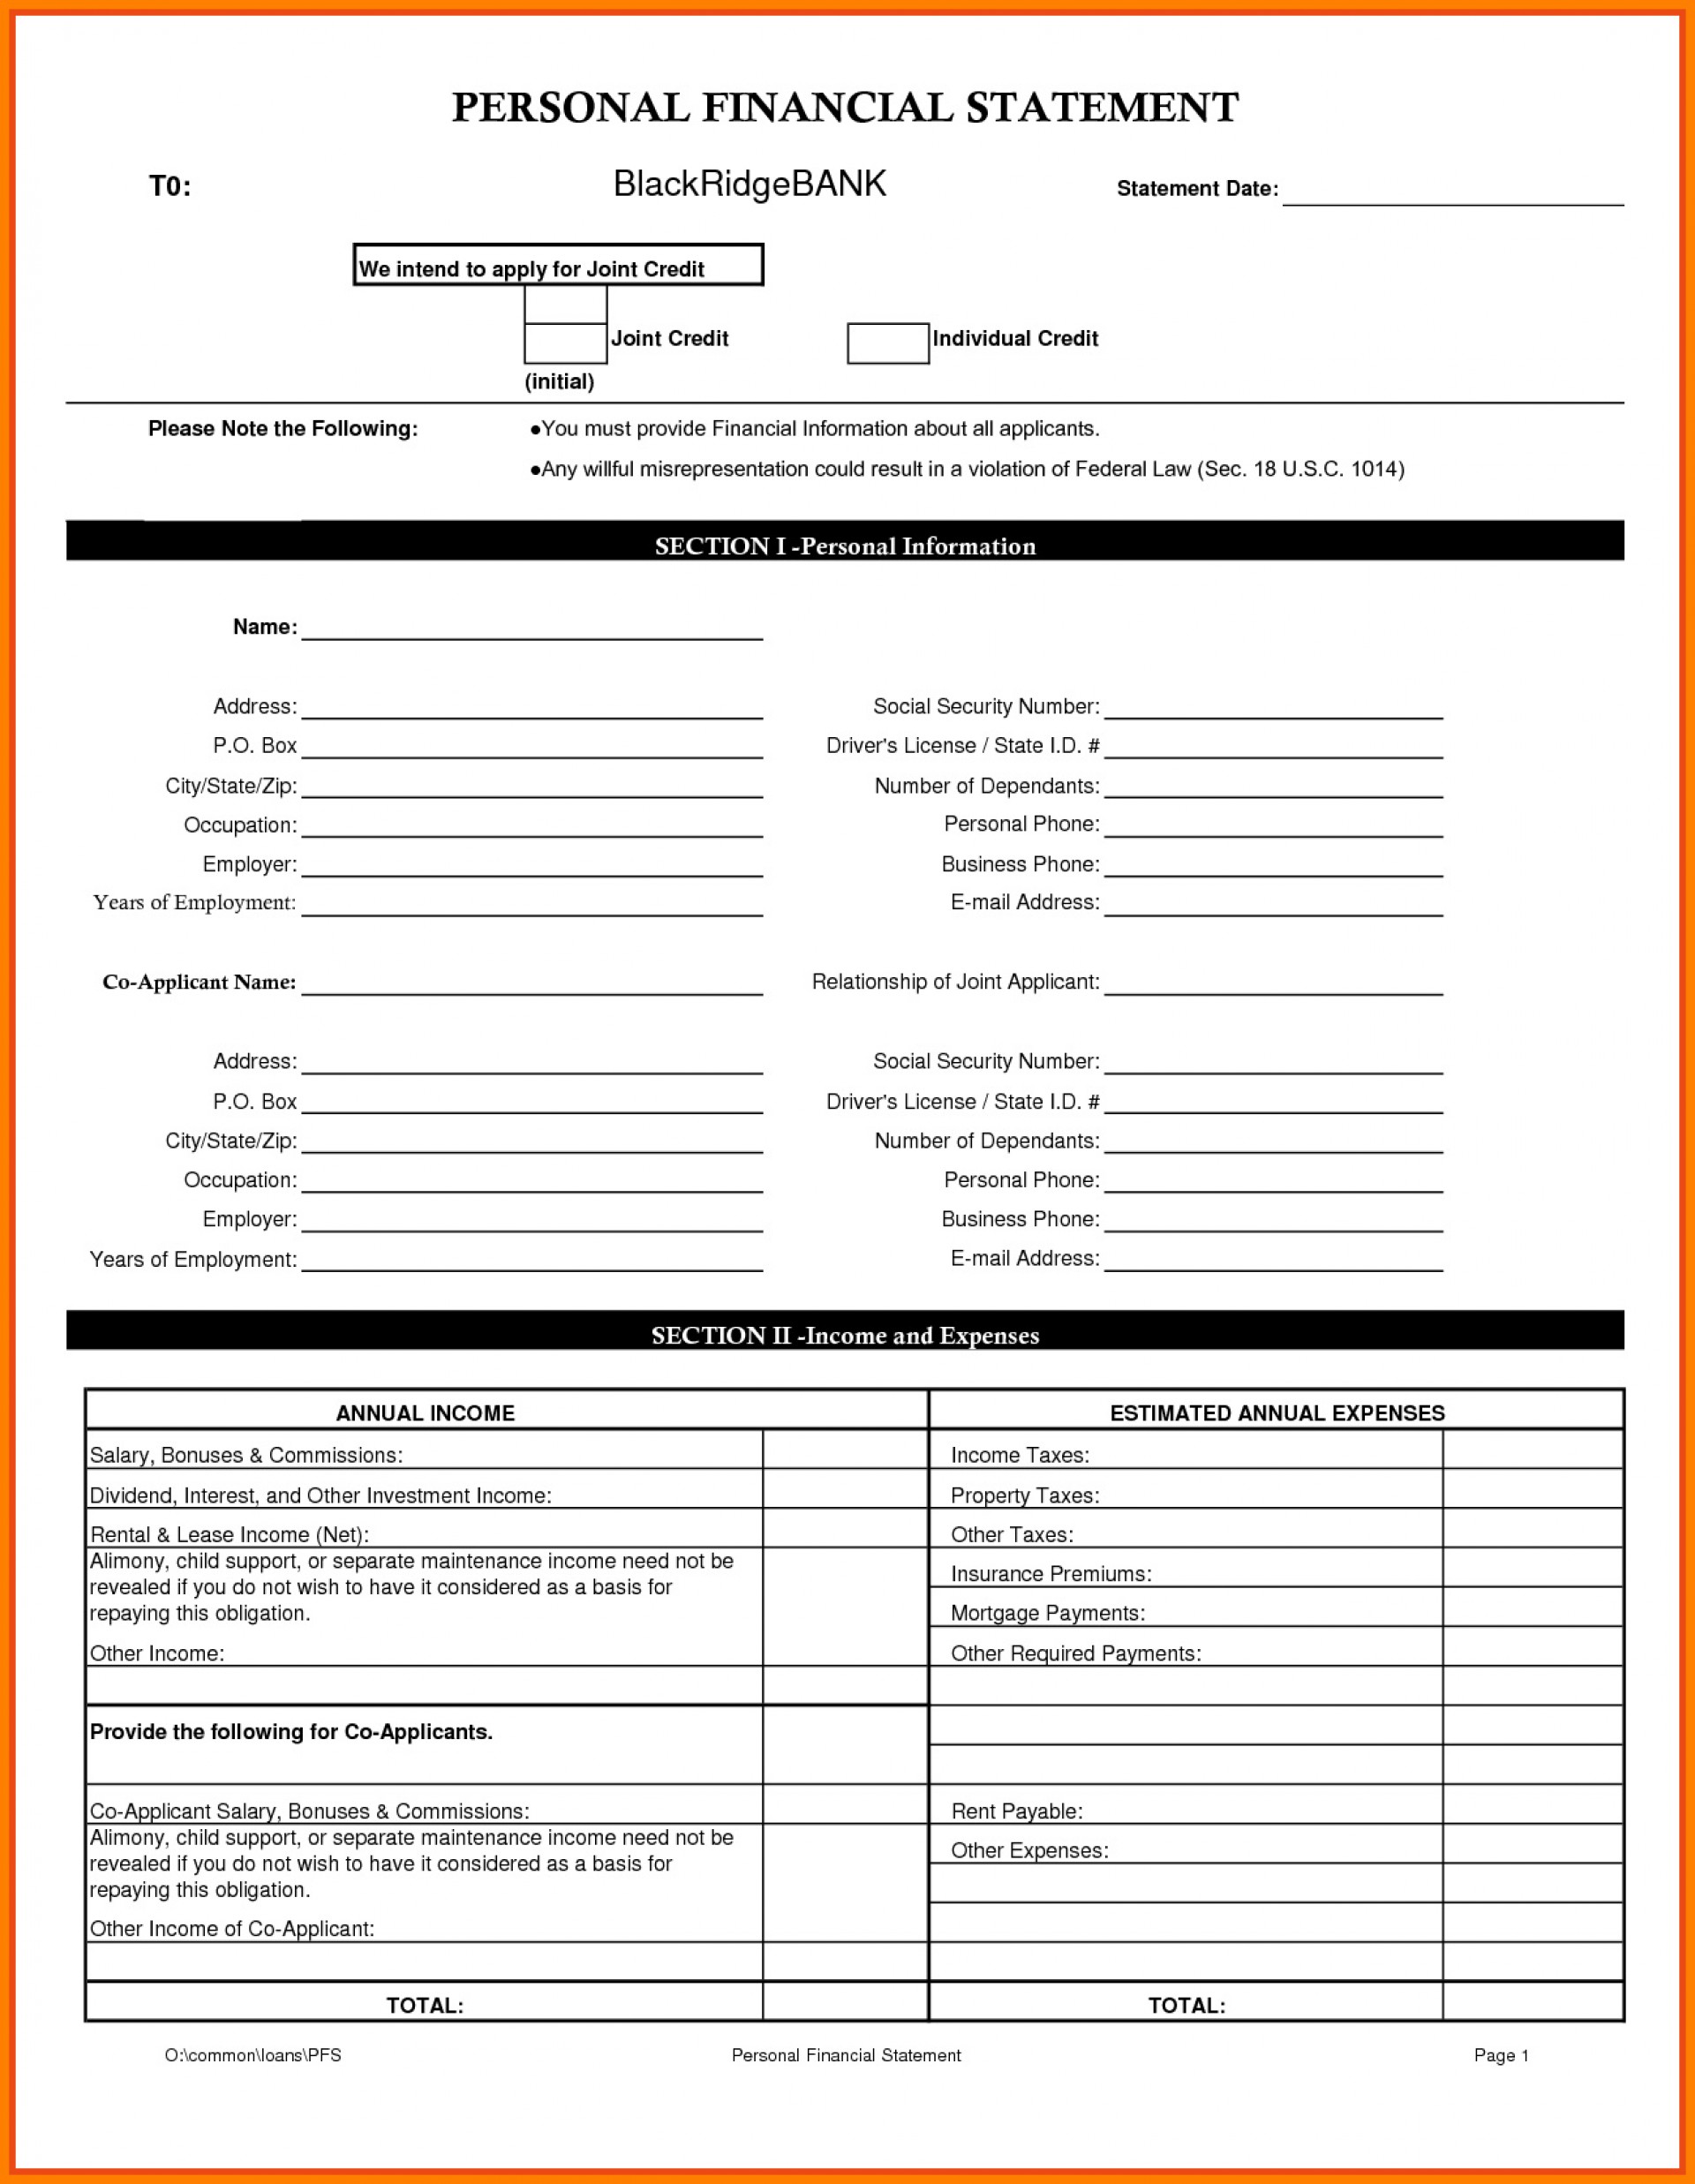 Sample Of Sba Personal Financial Statement Excel Template With Sba Personal Financial Statement Excel Template Templates